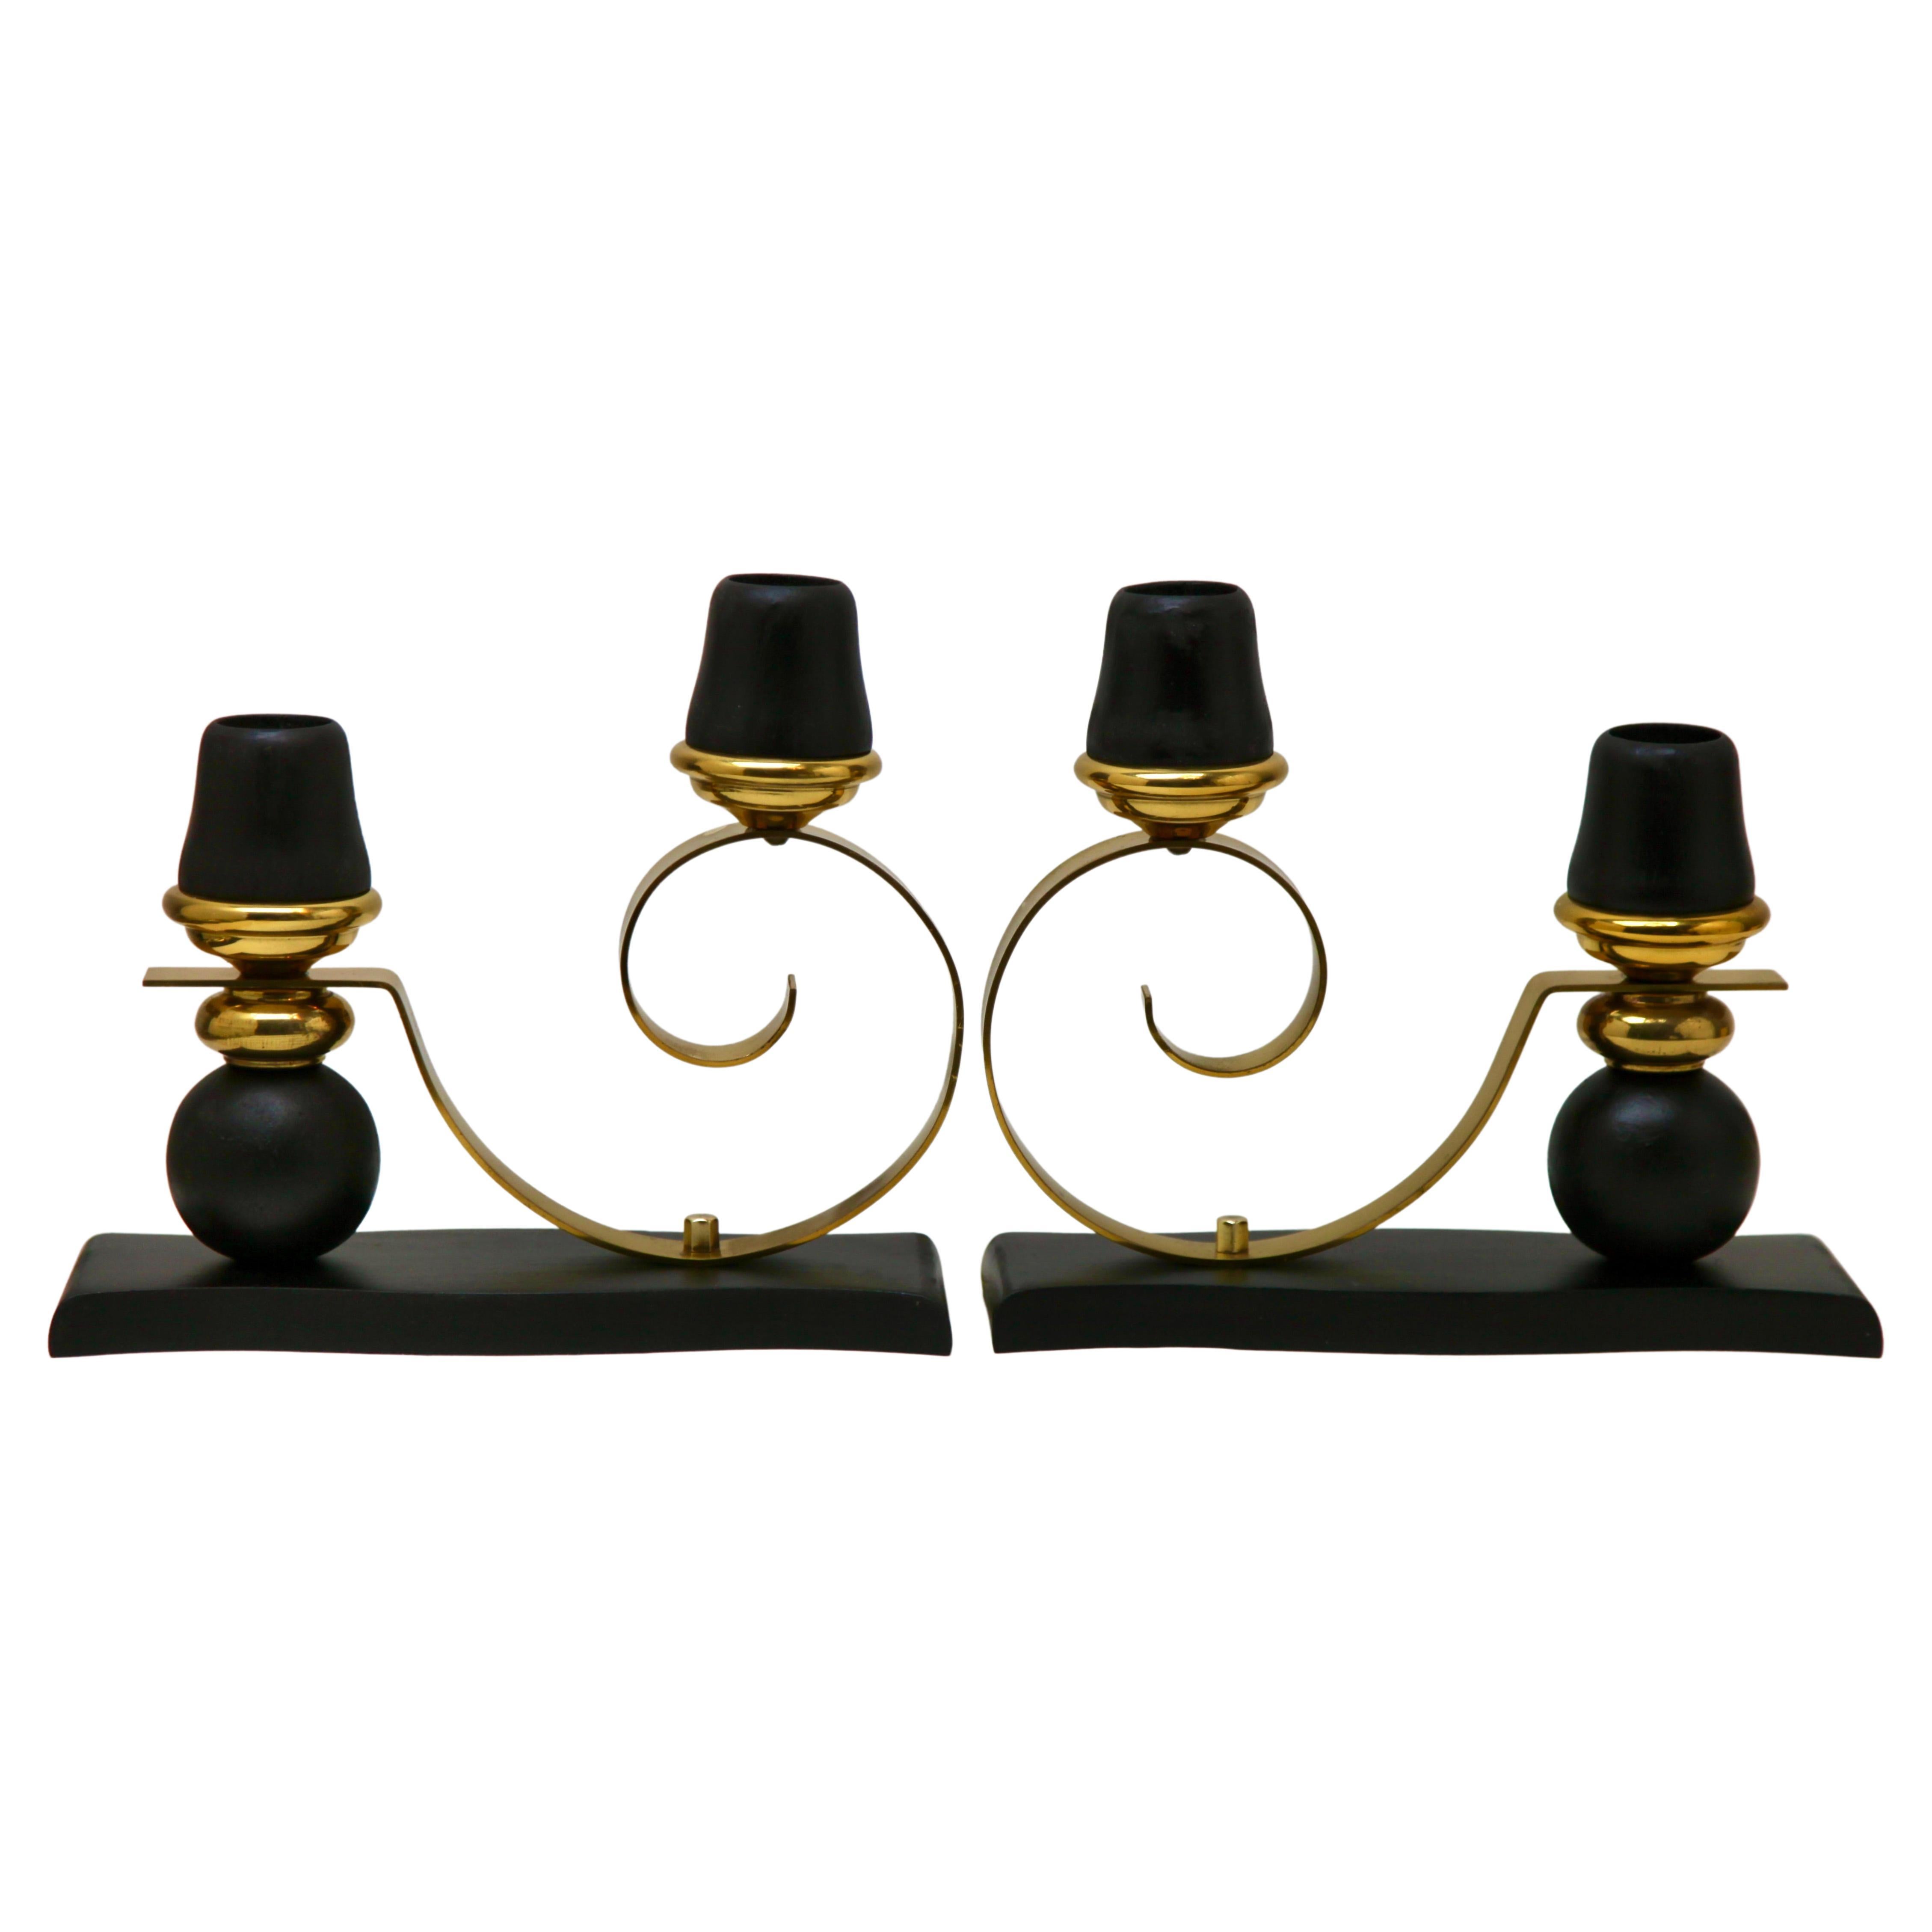 Art Deco Wooden and Brass Pair of Candlesticks, 1930s